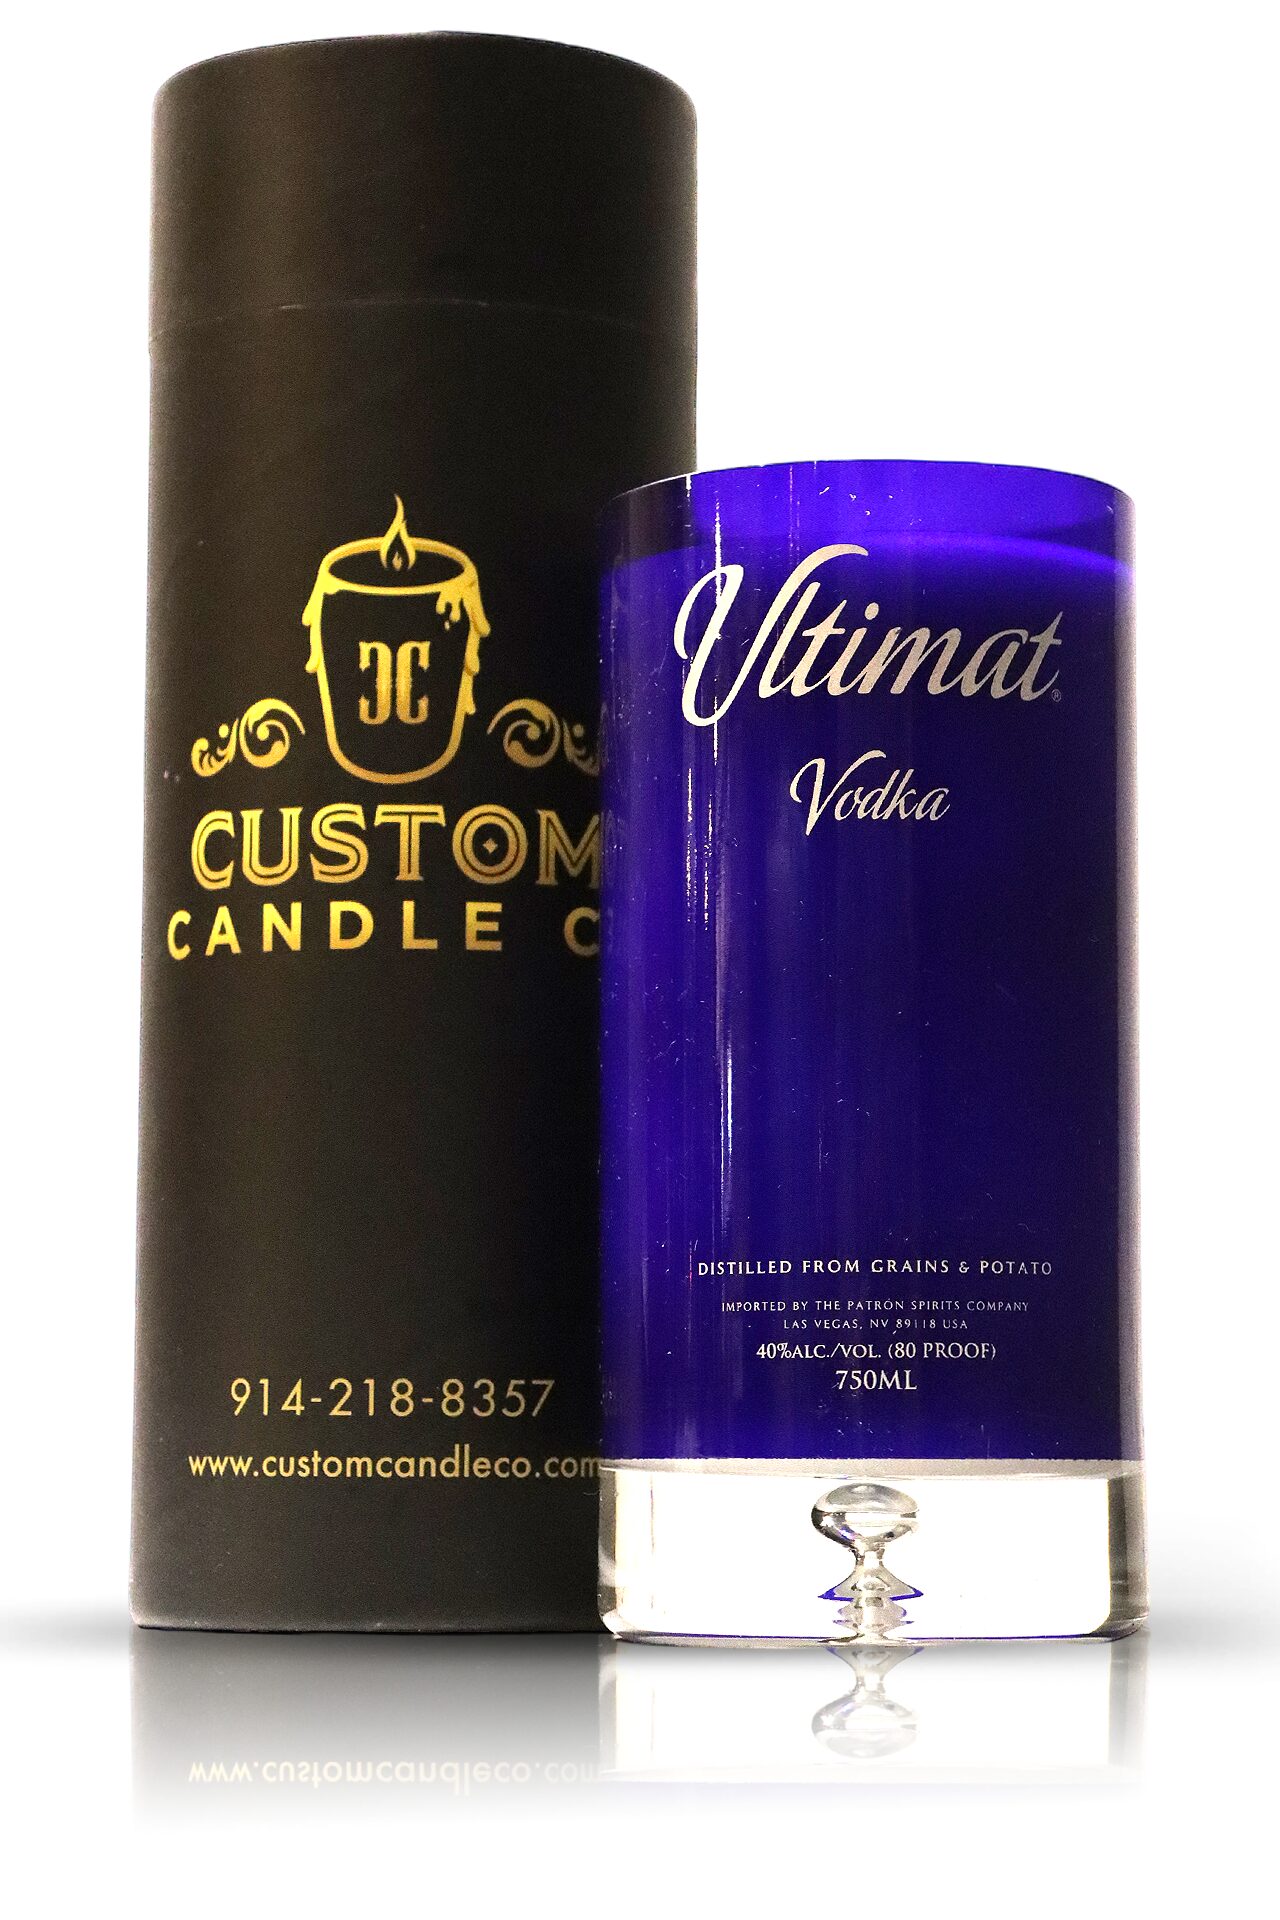 A blue Recycled Vodka Candle - Ultimat next to a box, enhanced by the presence of an exquisite ultimat vodka.